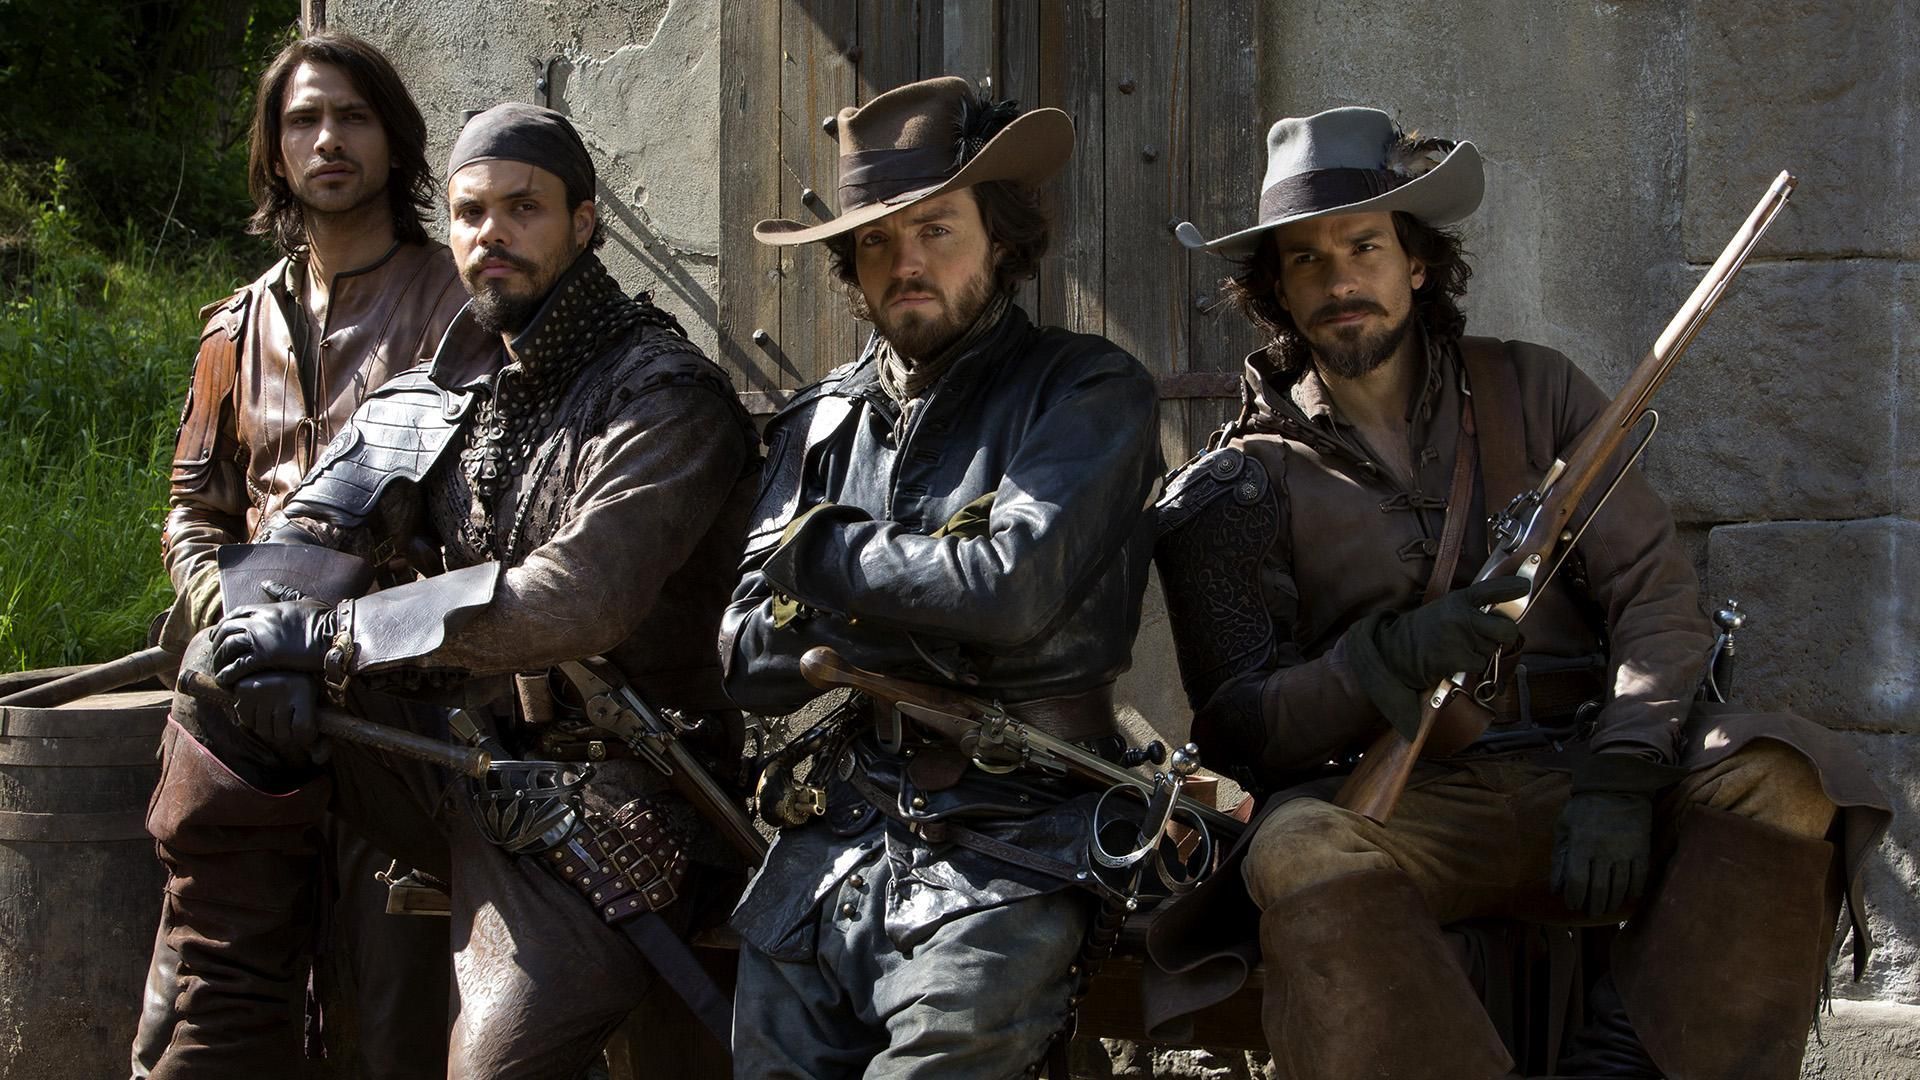 The Musketeers Wallpaper HD Download .com